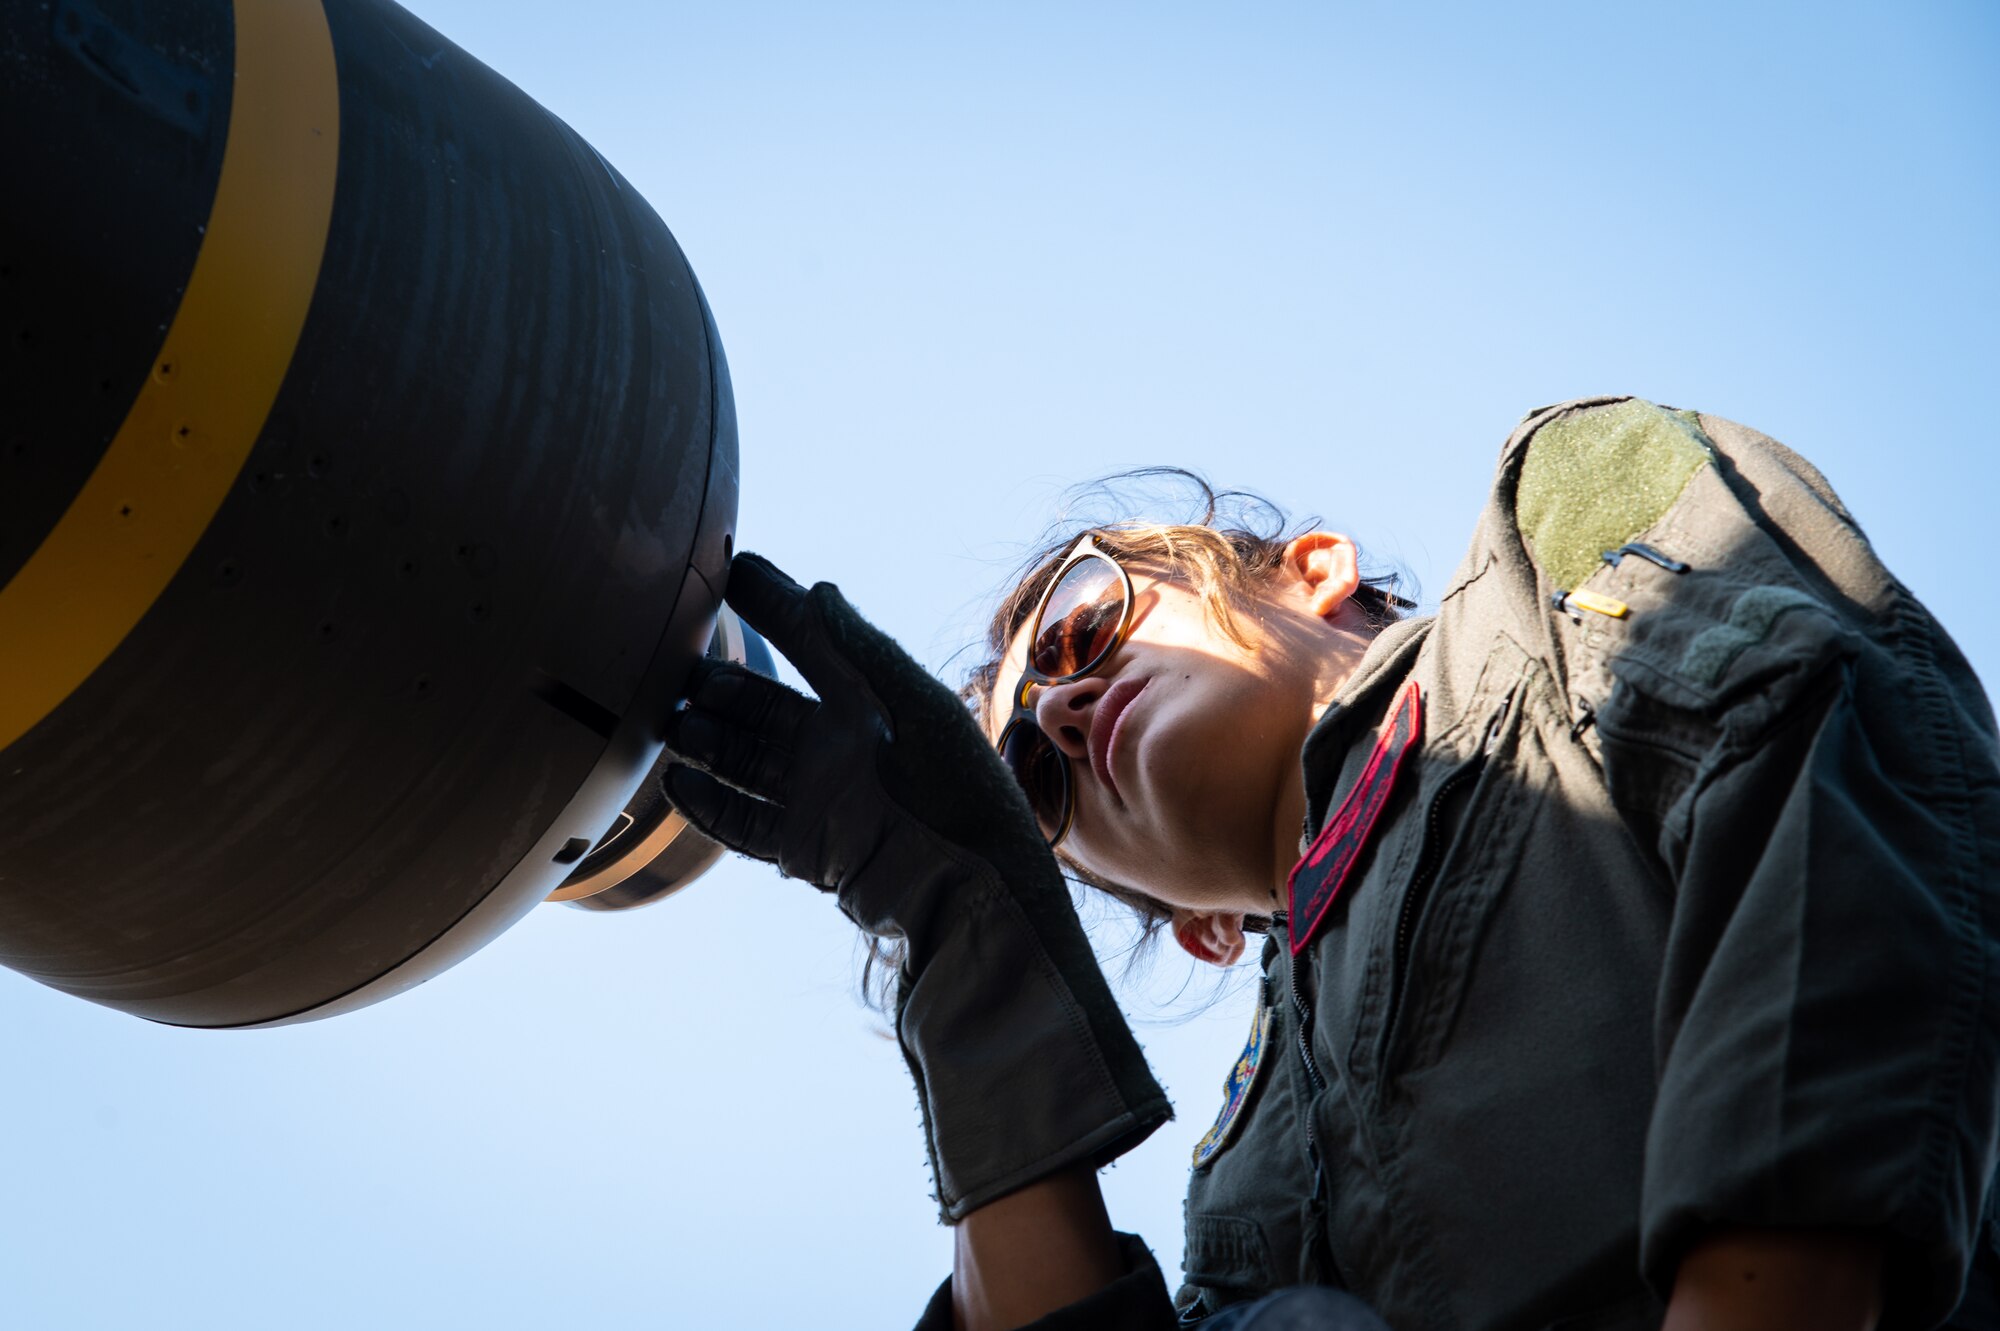 First Lt. Victoria Gurrola, 96th Bomb Squadron weapon systems officer, inspects a CBU-105 conventional munition before takeoff at Barksdale Air Force Base, Louisiana, Aug. 25, 2021. CBU-105s are multi-targeting bombs capable of destroying numerous armored targets in a single drop. (U.S. Air Force photo by Airman 1st Class Chase Sullivan)